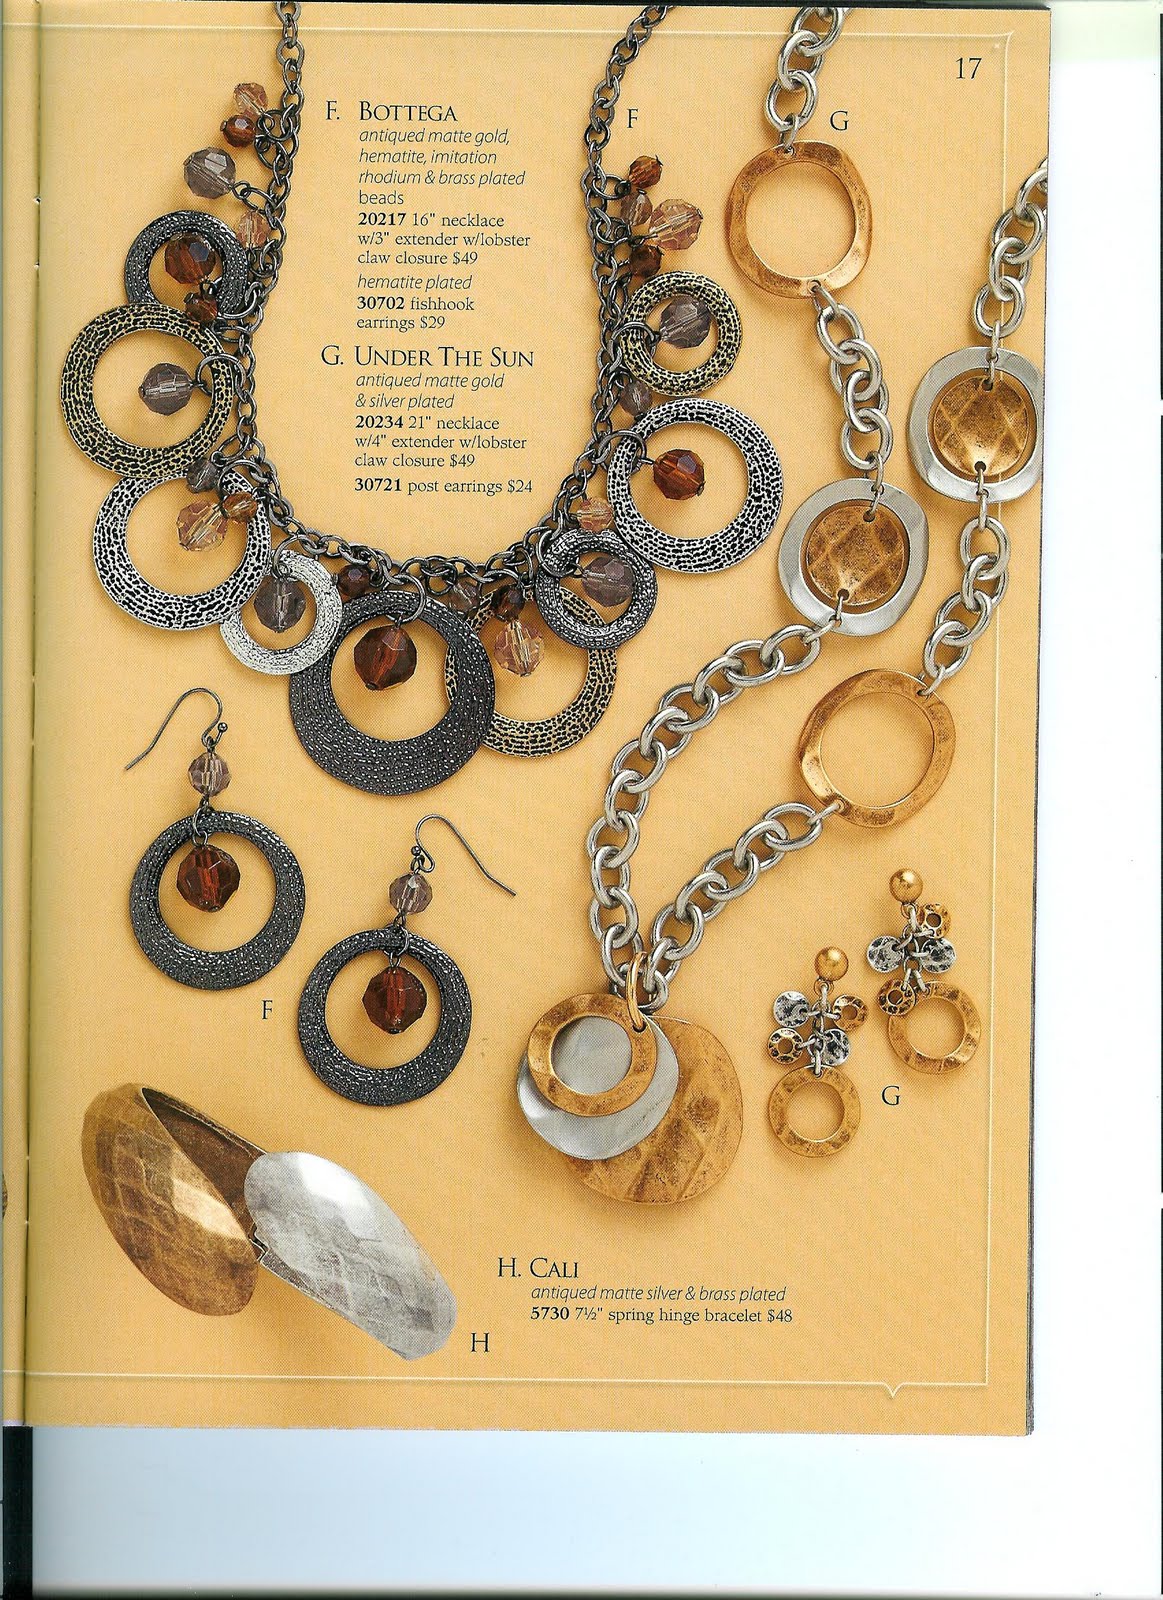 Jewelry Diva Premier Designs Jewelry The Catalog Part One